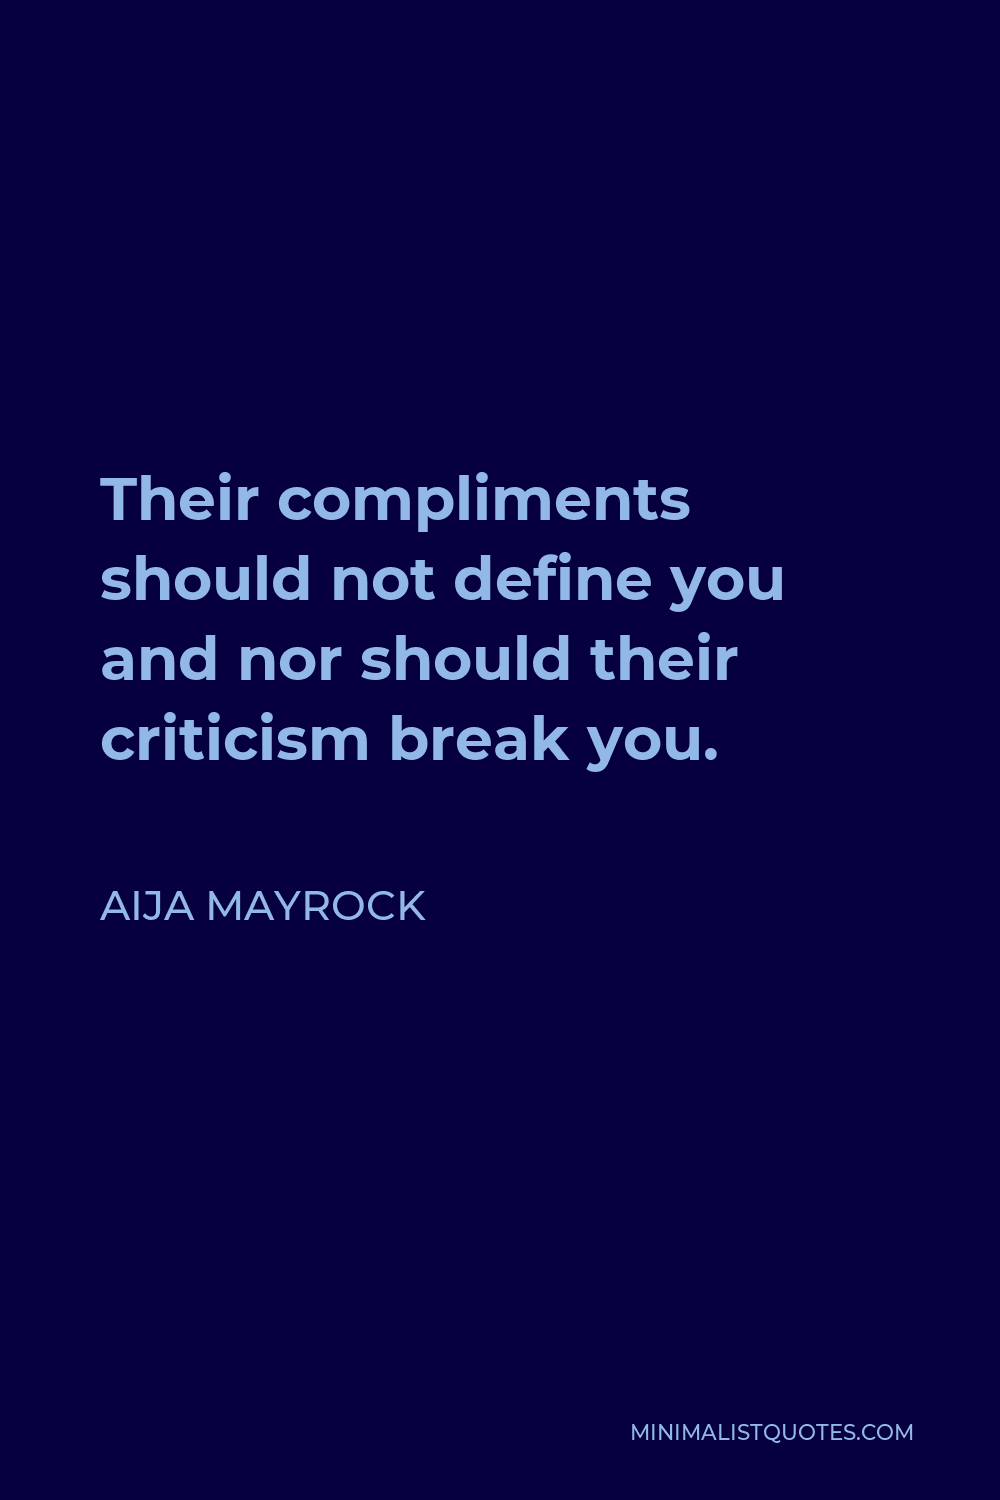 Aija Mayrock Quote - Their compliments should not define you and nor should their criticism break you.